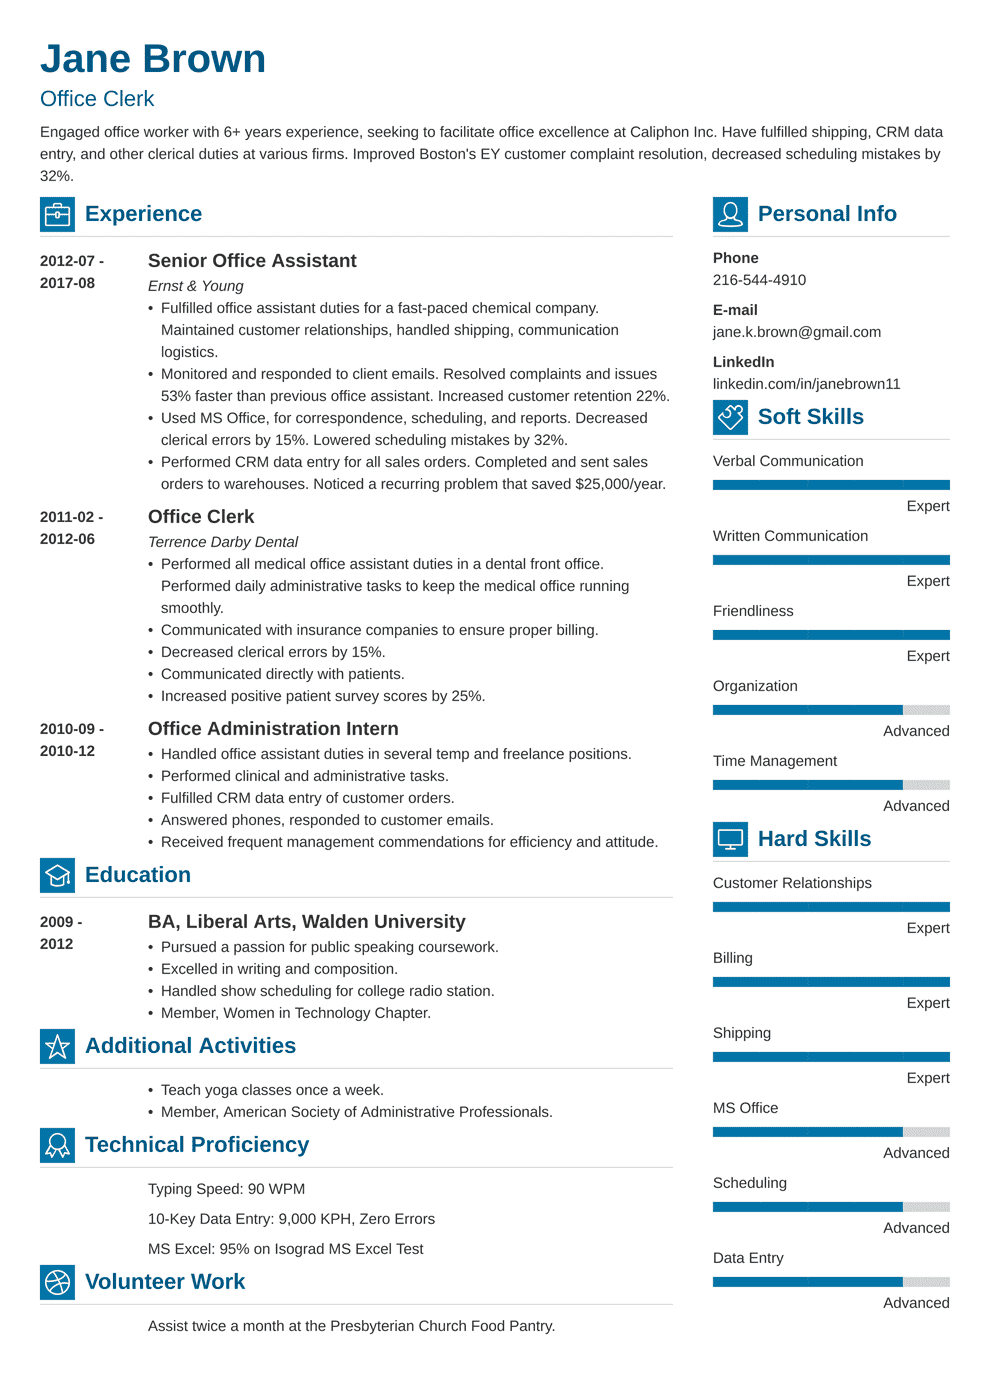 Office Clerk Resume Samples & Writing Guide With Tips